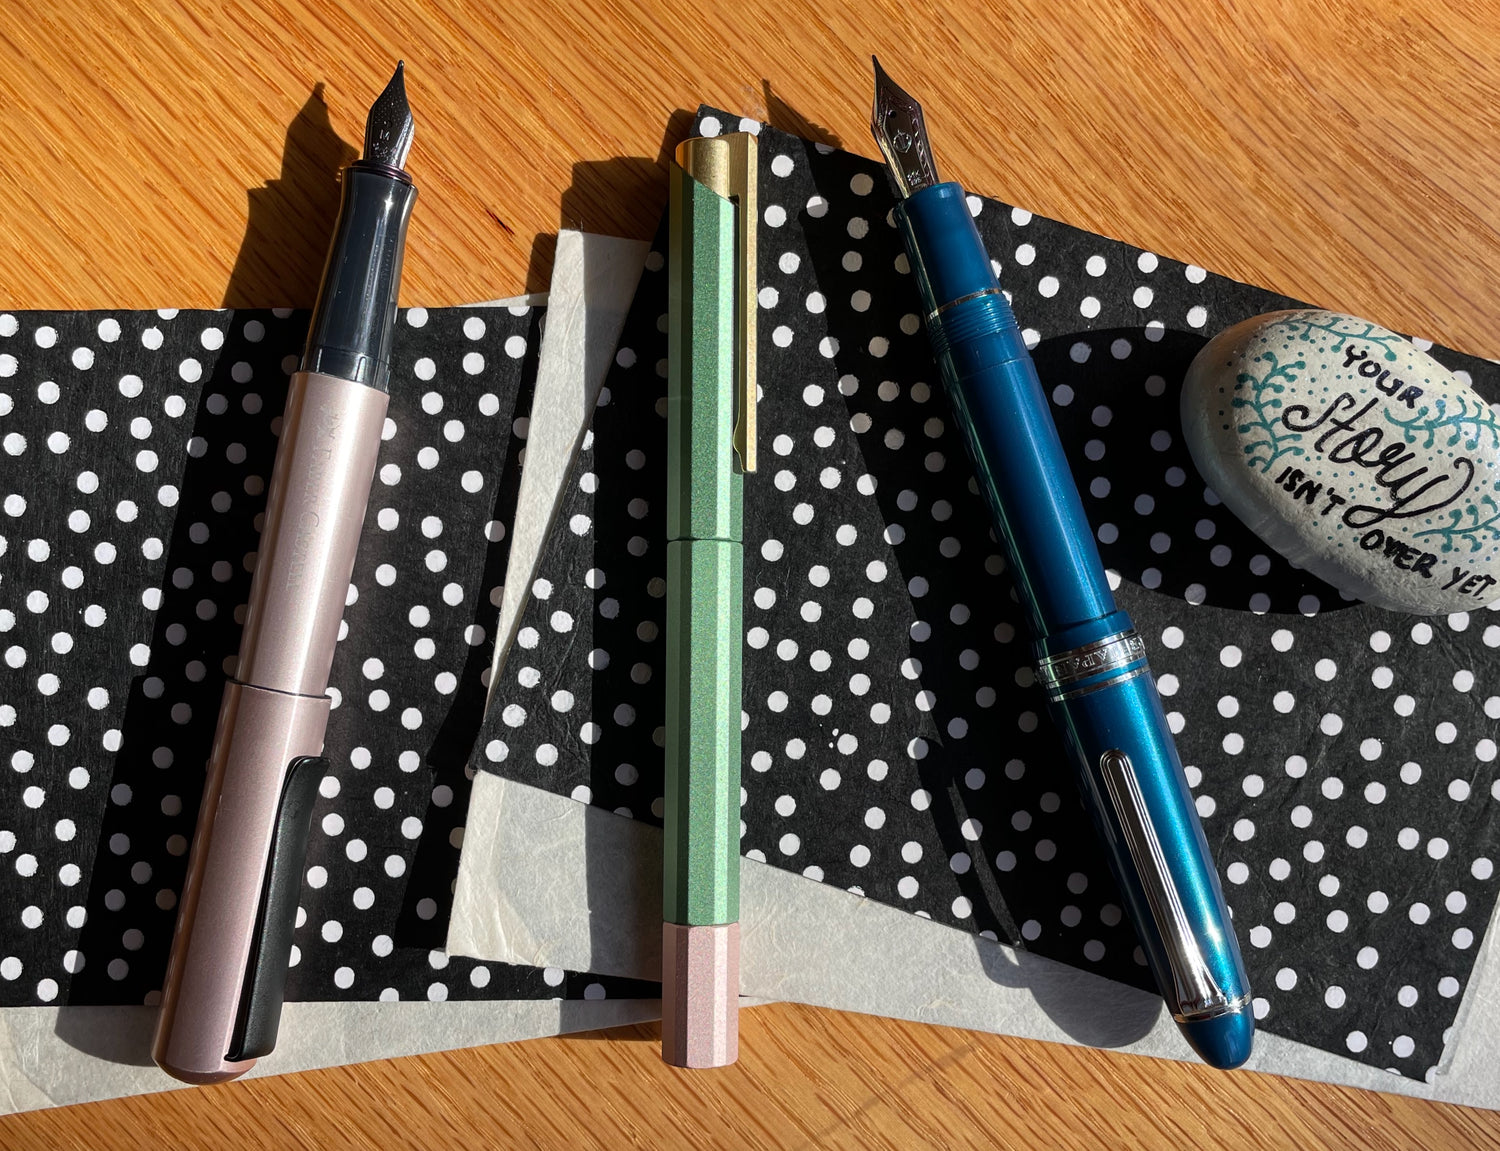 Getting Subjective Laura's Favorite Pens this Year! (Part One